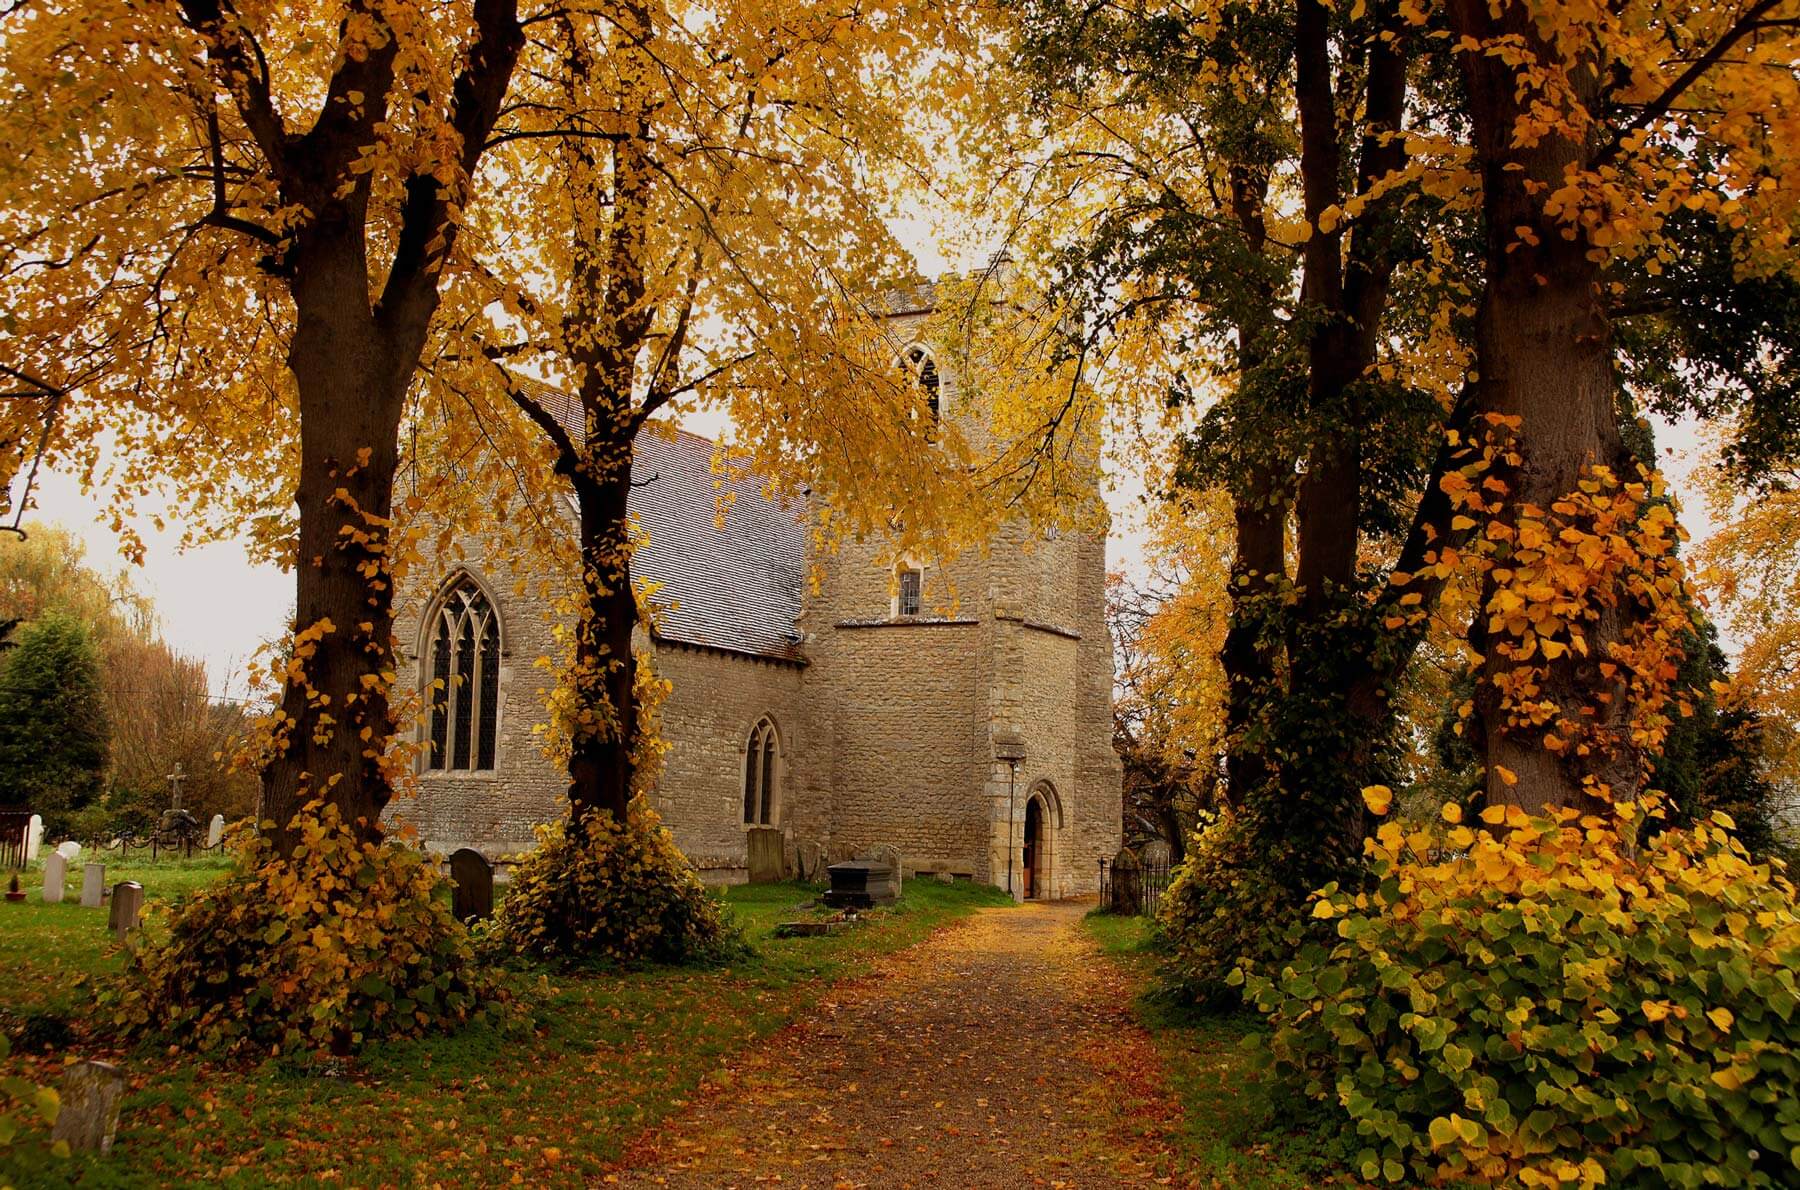 St. Catherine's Church in Towersey among autumn leaves